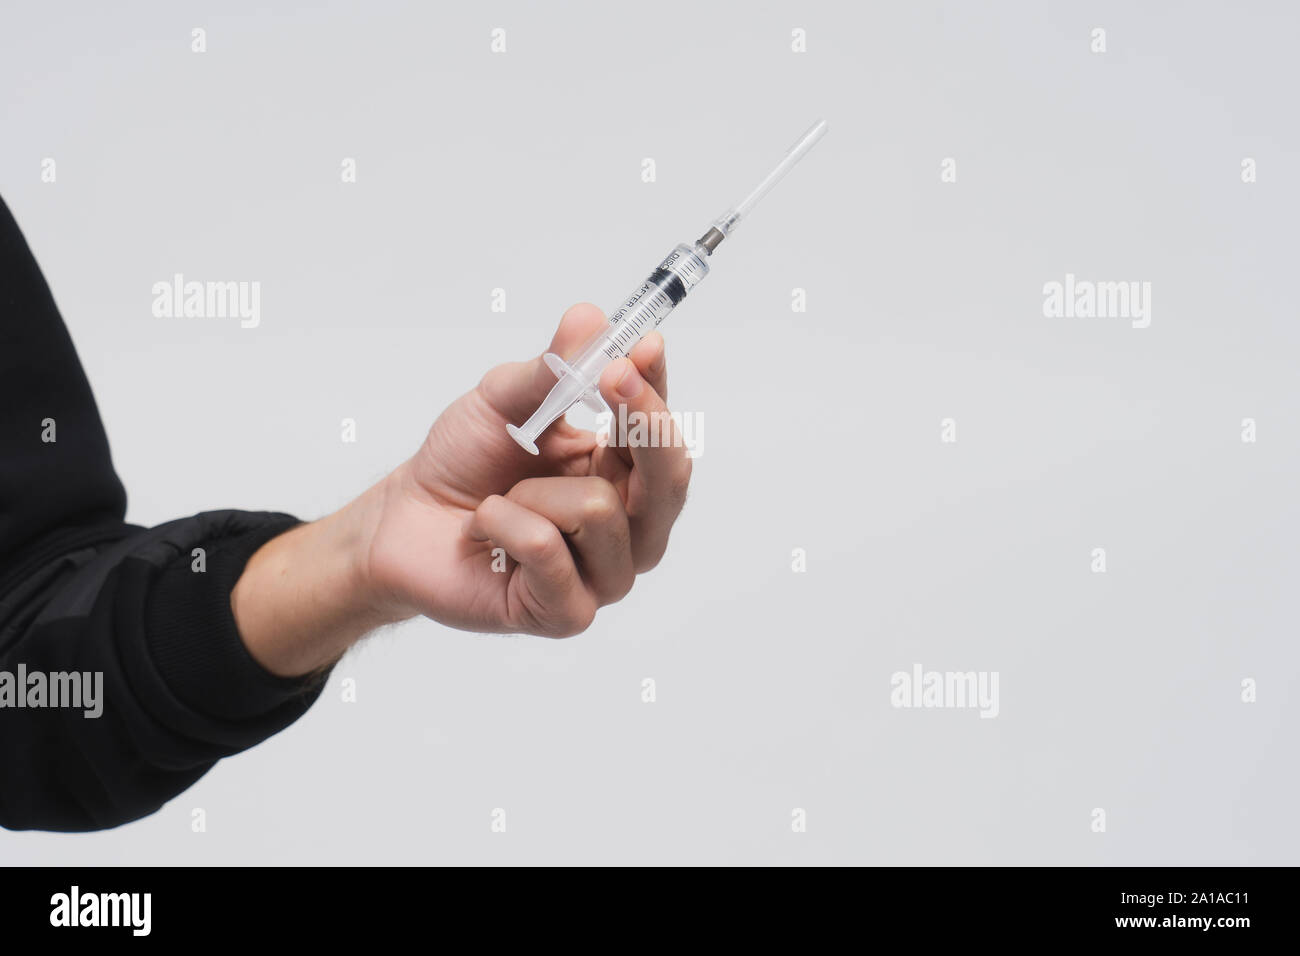 Man's hand hold a syringe with liquid. Guy in a black hoodie on a white background. Person offers you drug or medical treatment. Drug addict. Stock Photo